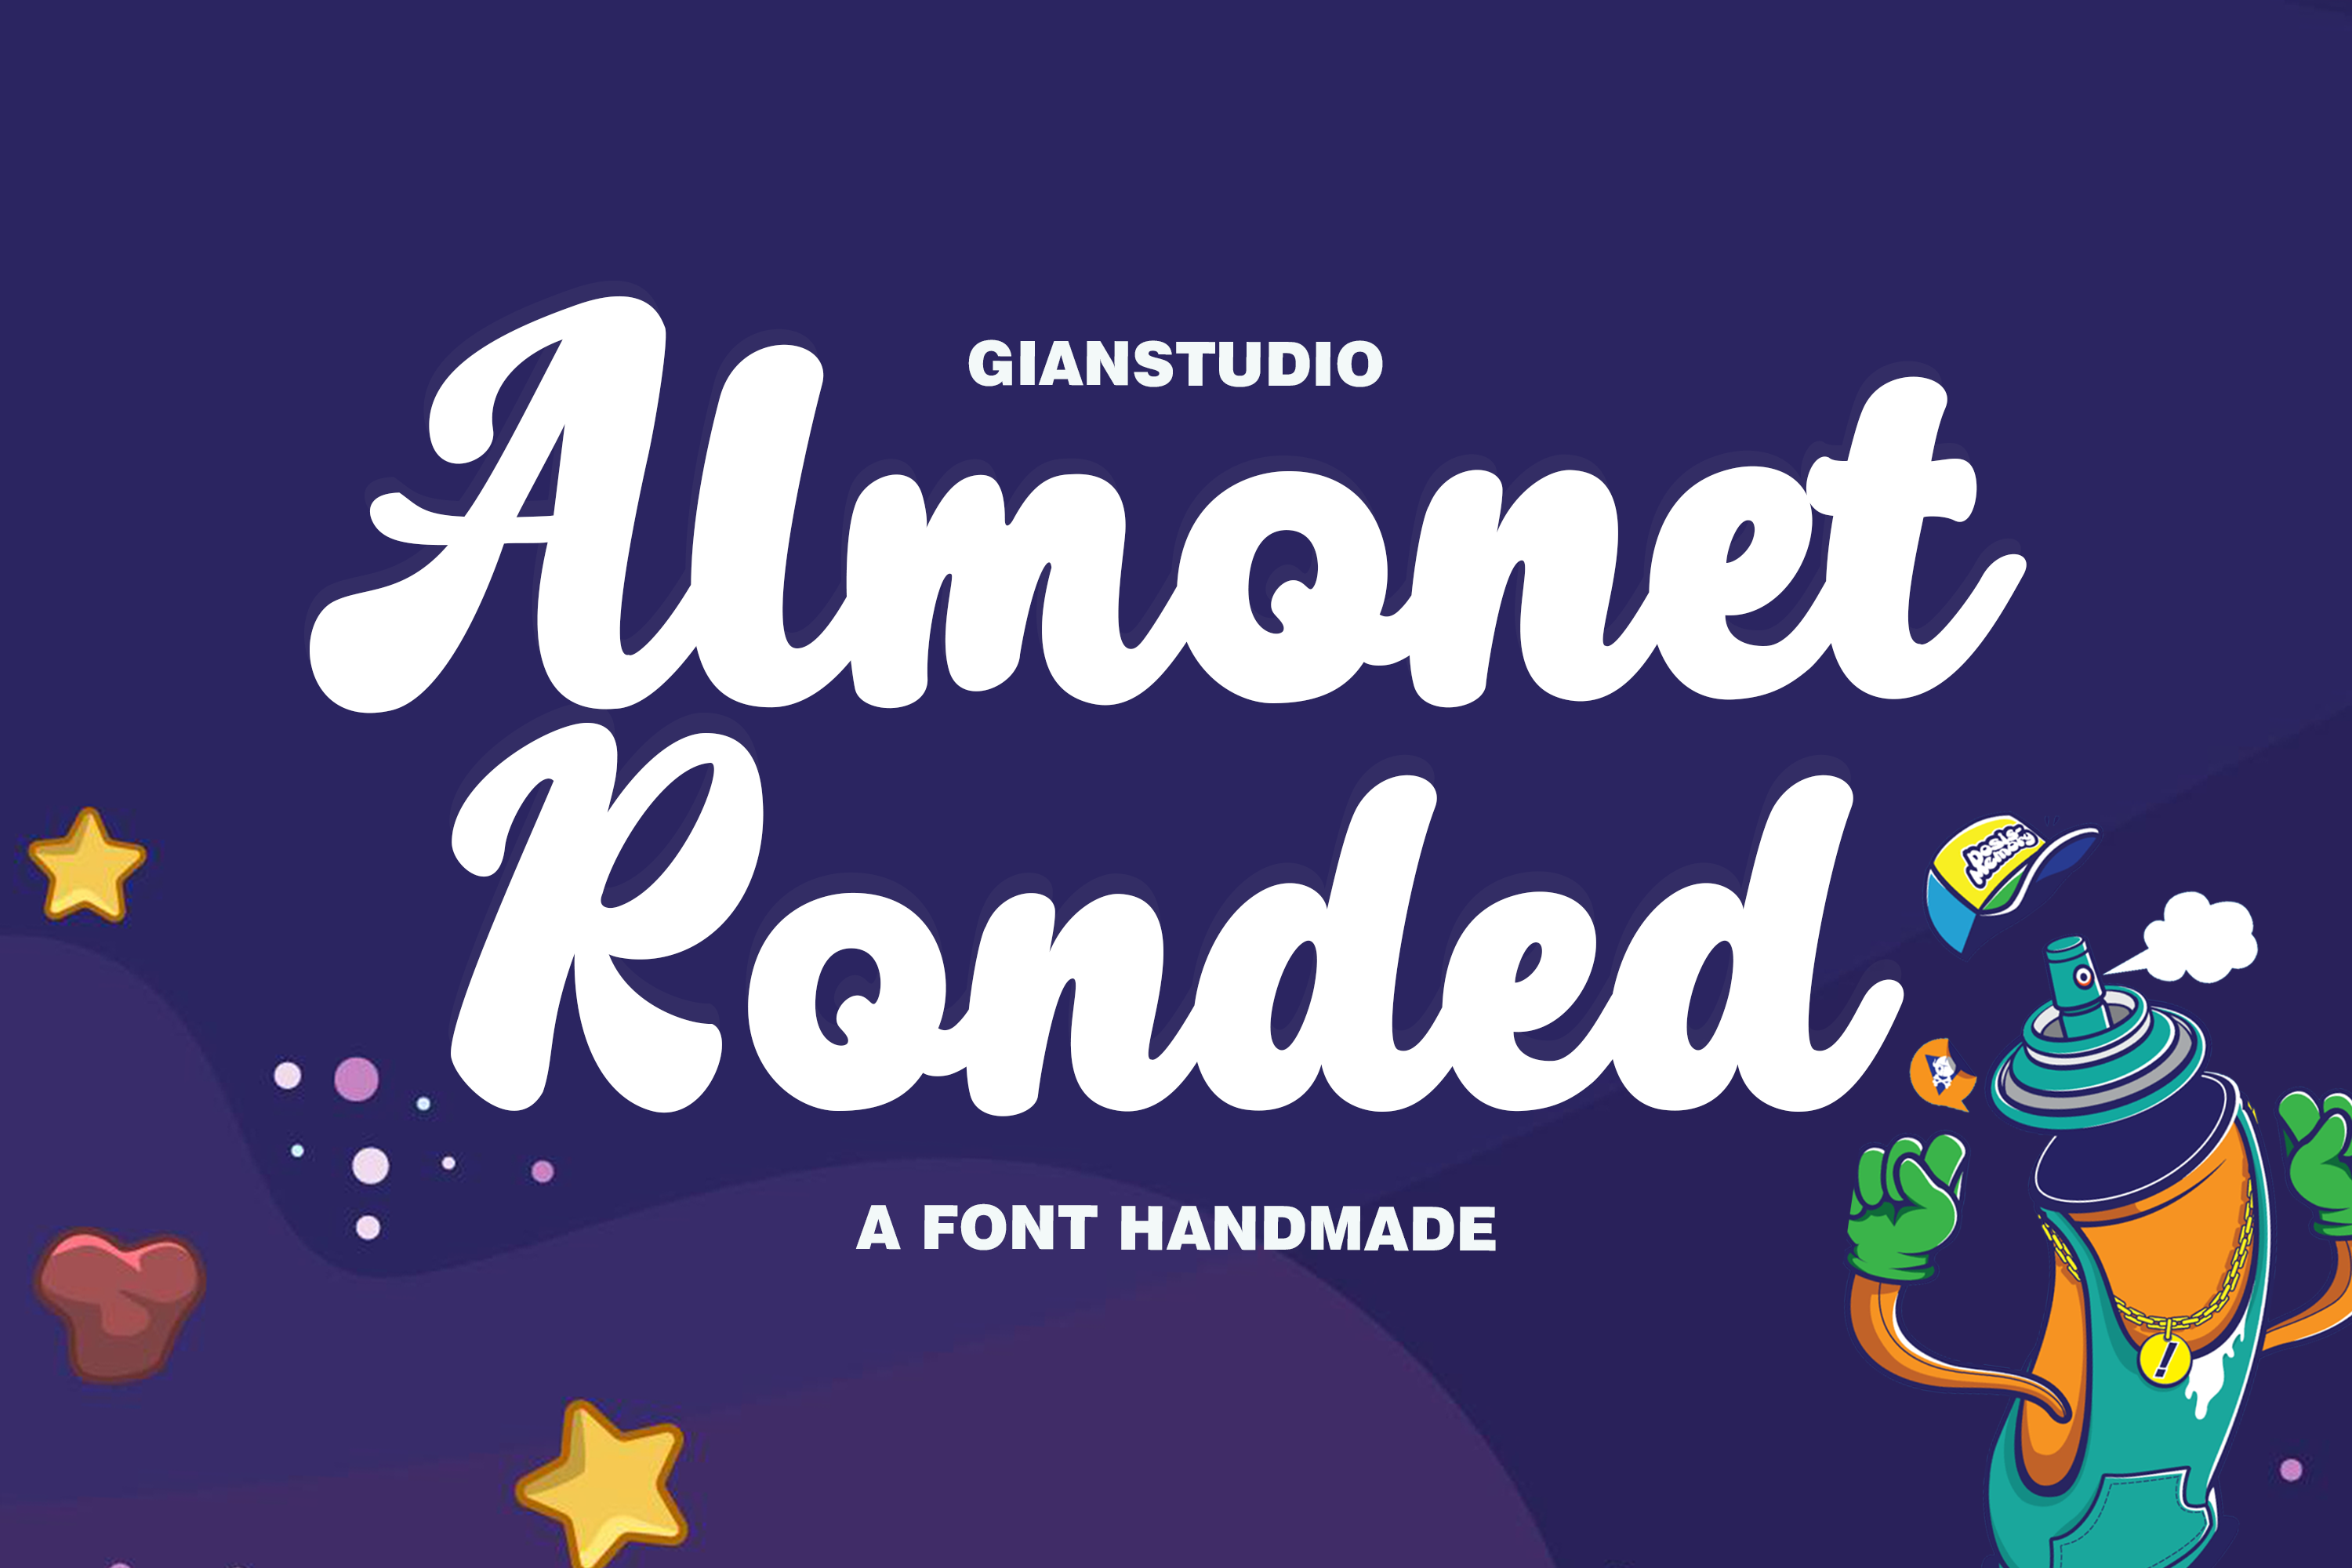 Almonet Ronded